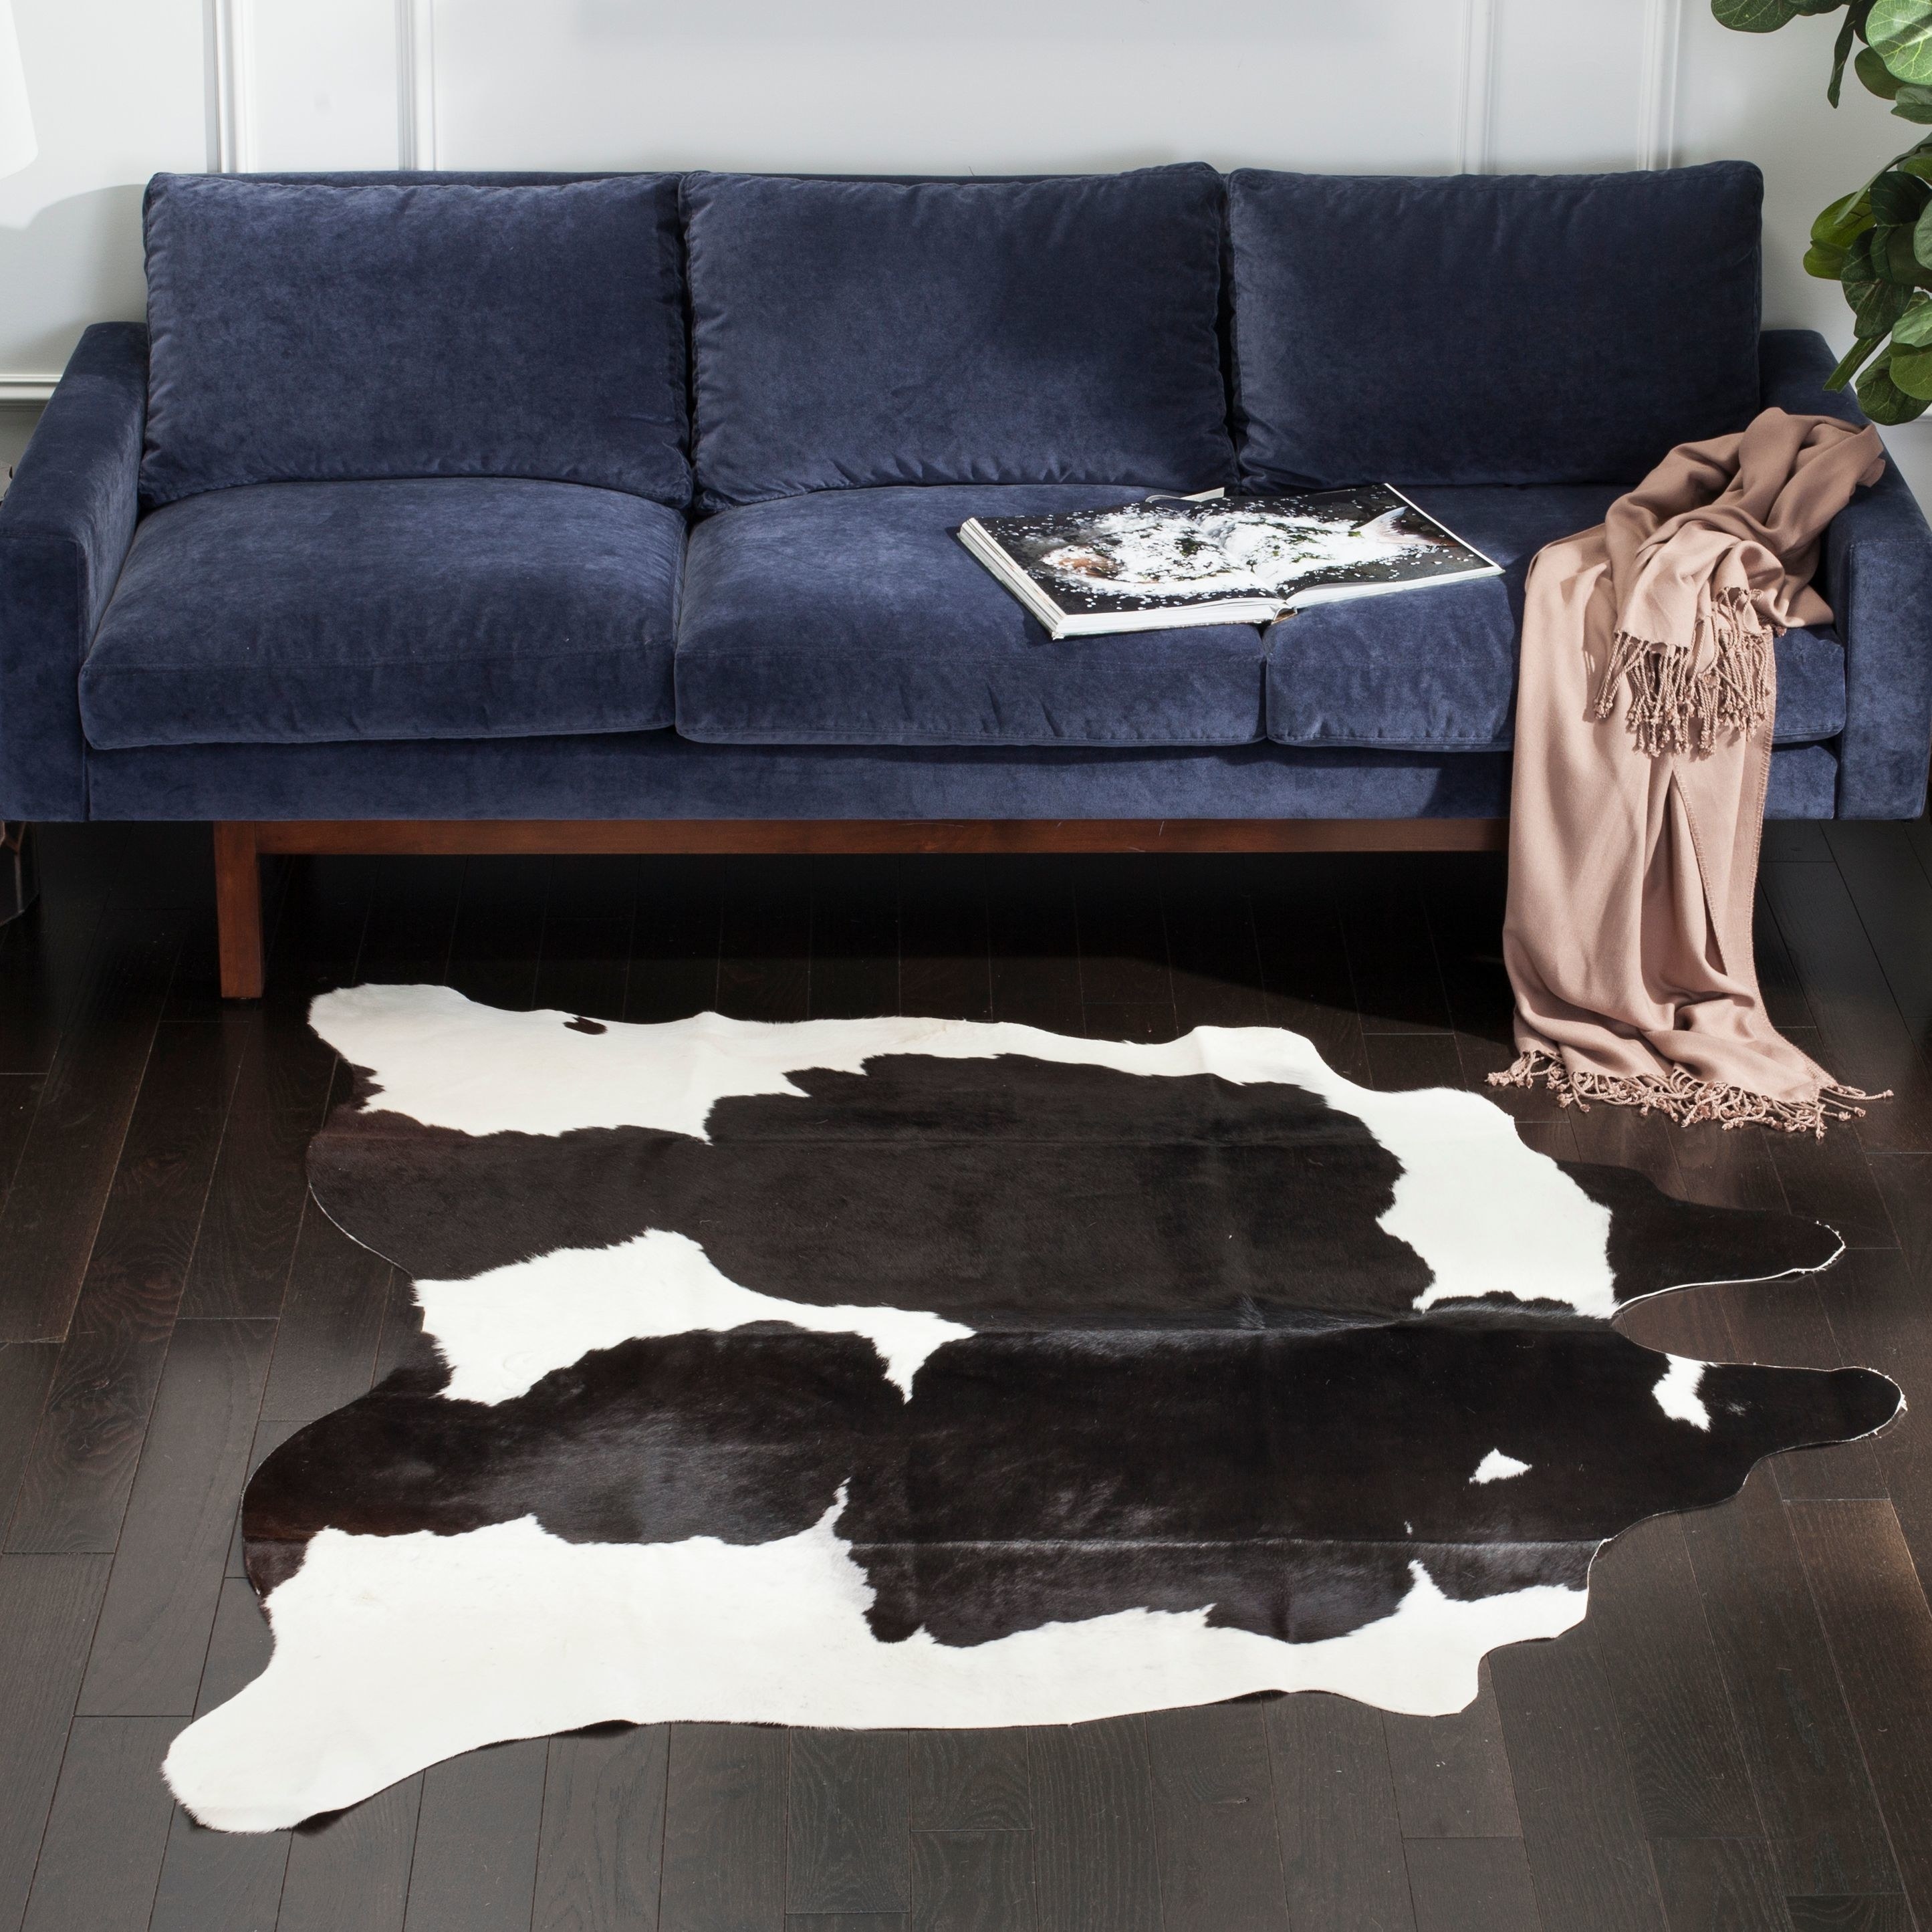 a navy couch and a black and white cow hide rug